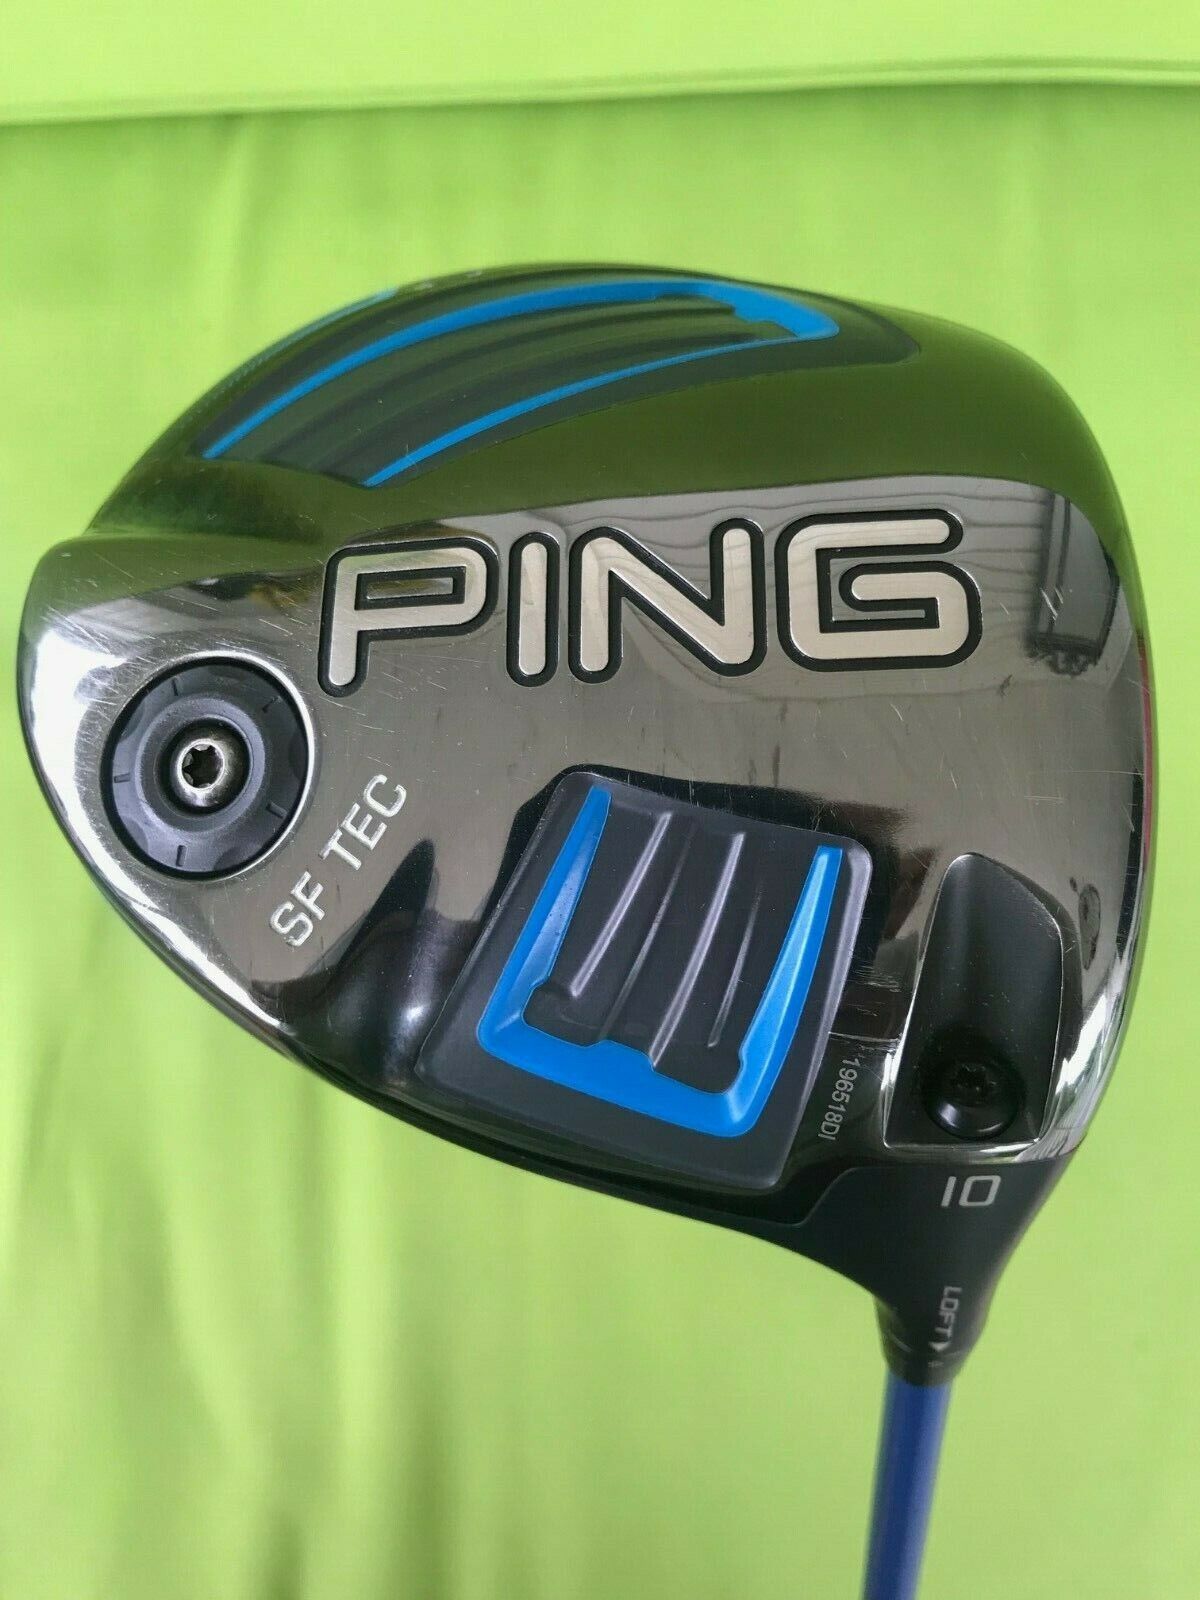 PING G SF TEC 10* RH Driver - Excellent condition with TFC 419 graphite shaft